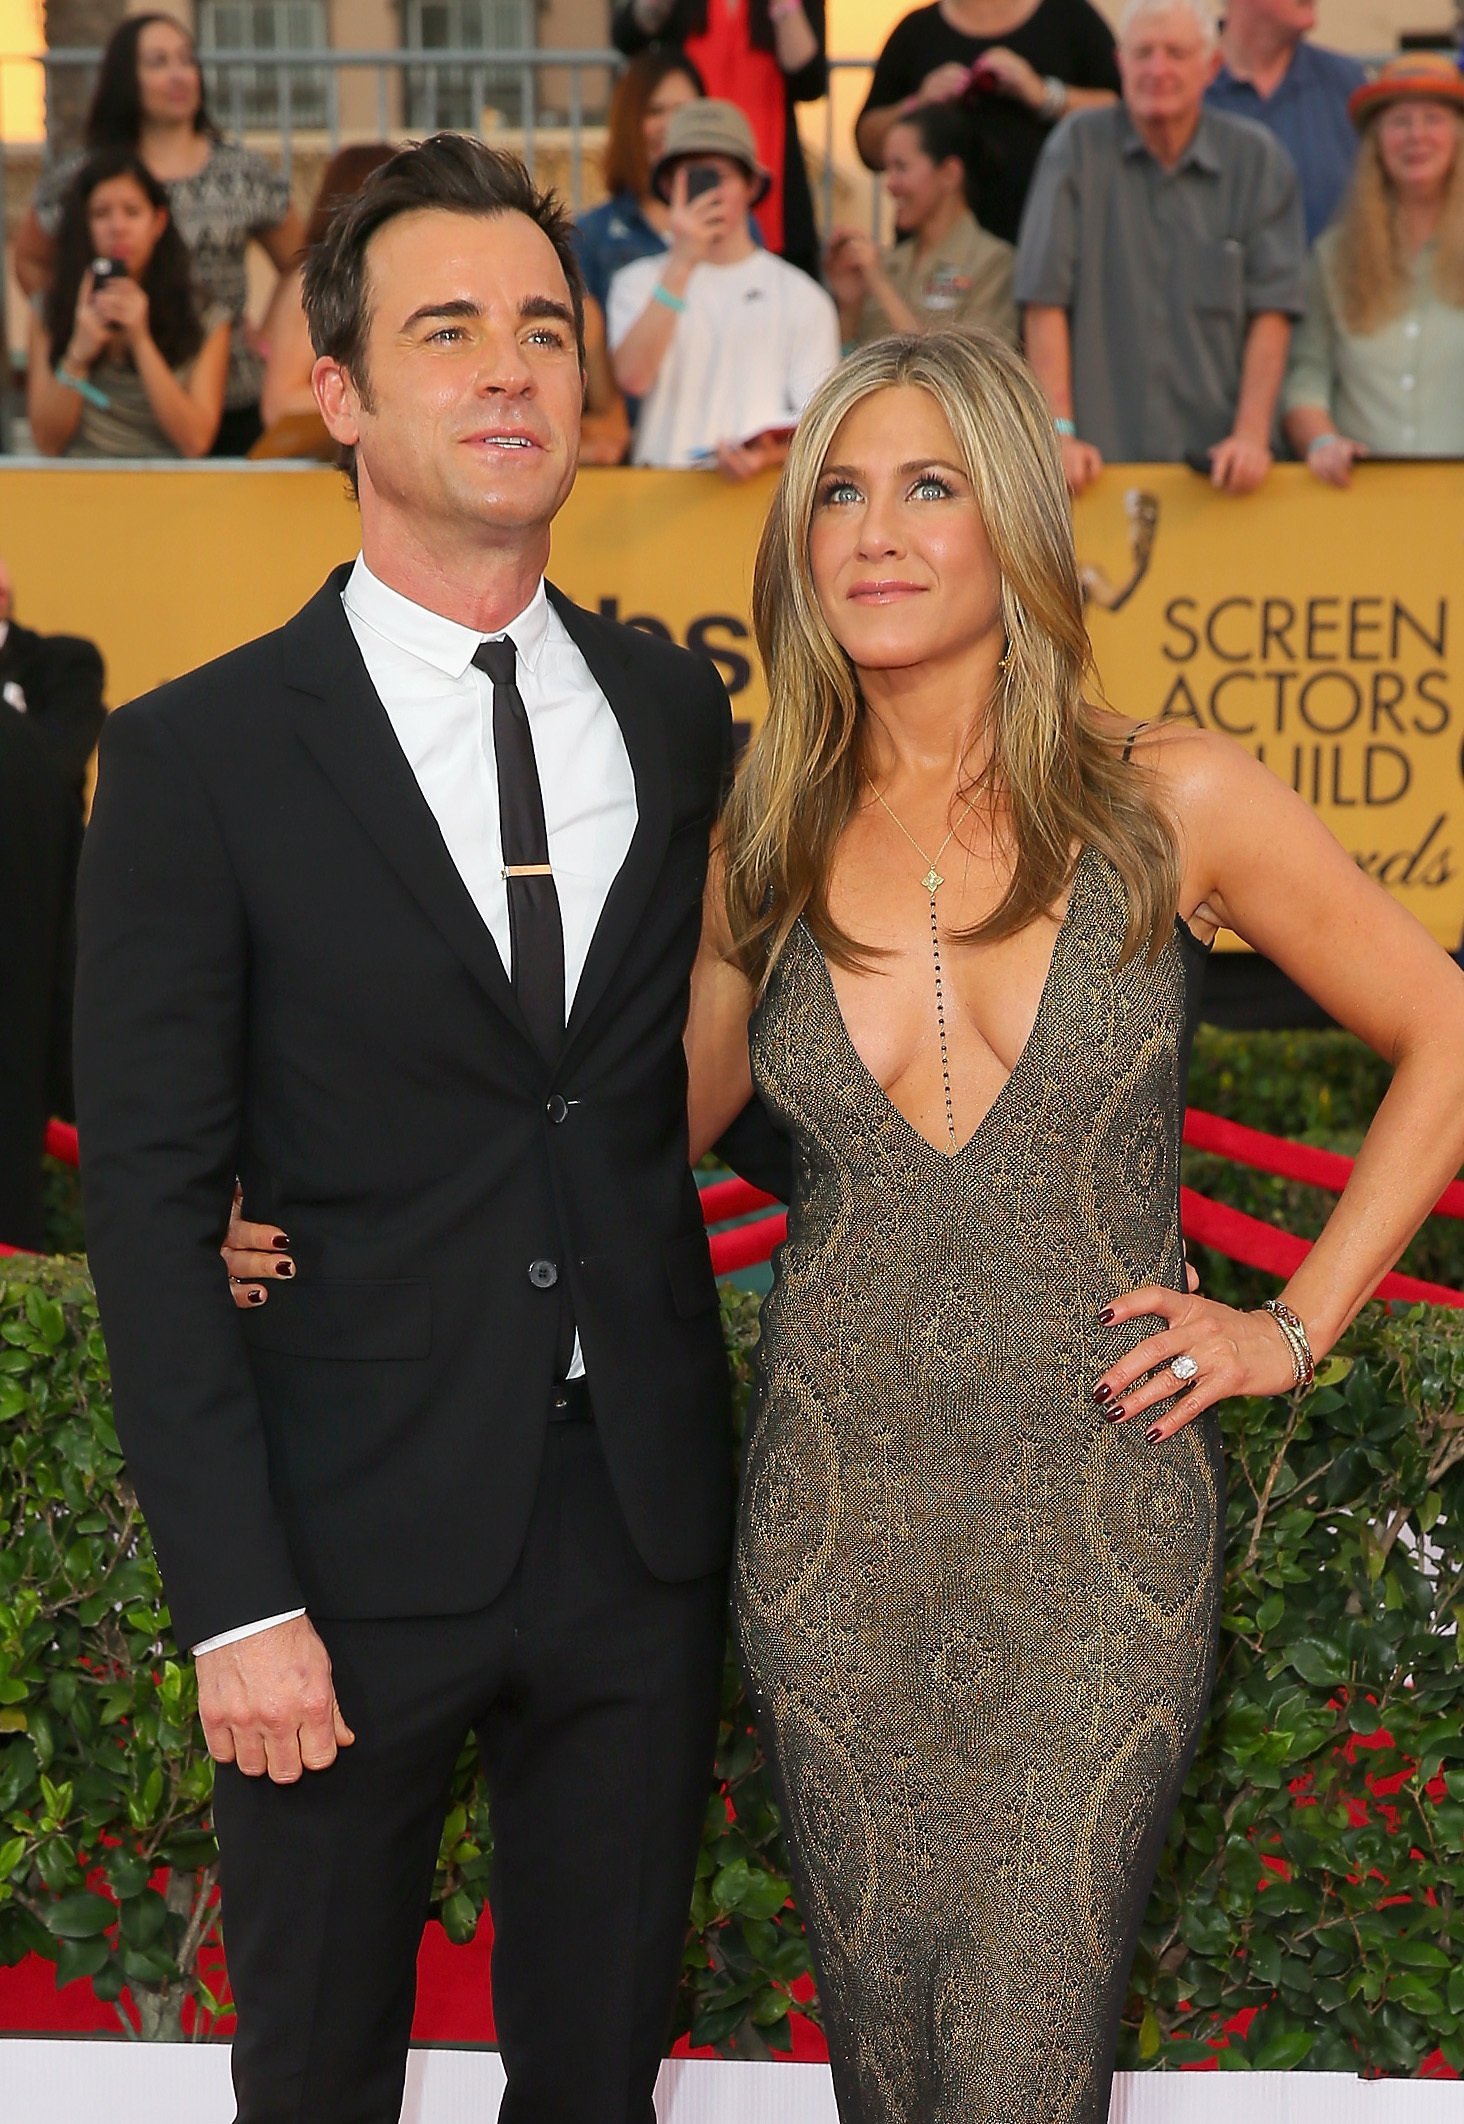 Jennifer Aniston isn't pregnant -- but she is "fed up" with the constant media speculation and "objectification" about her personal life that has led to years of rampant rumors, she says in a new essay.